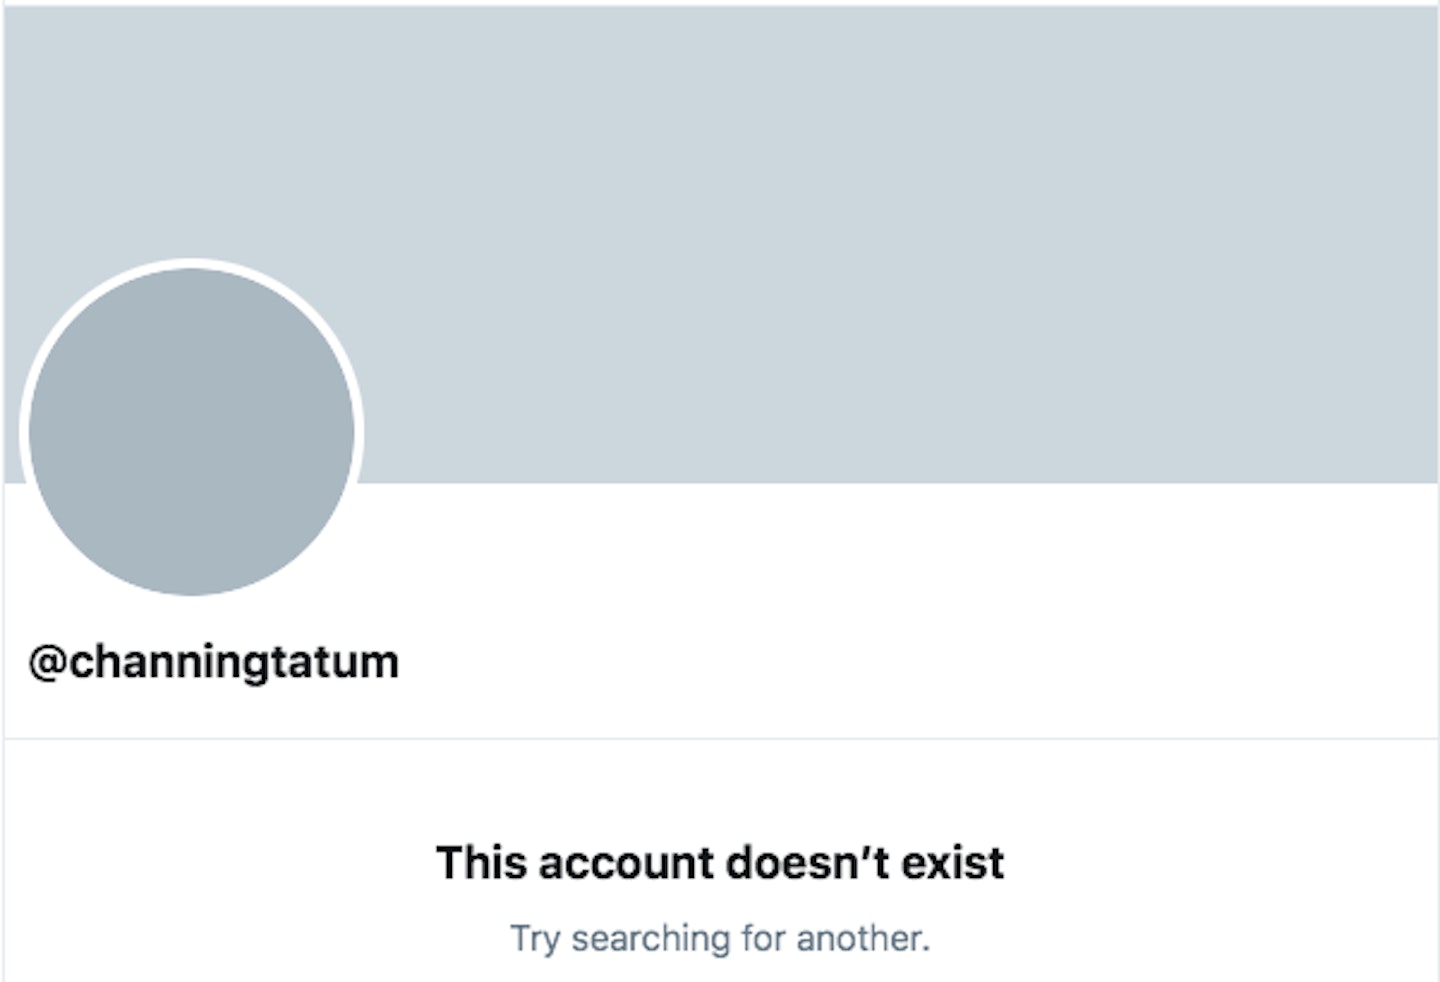 Channing Tatum Twitter account doesn't exist